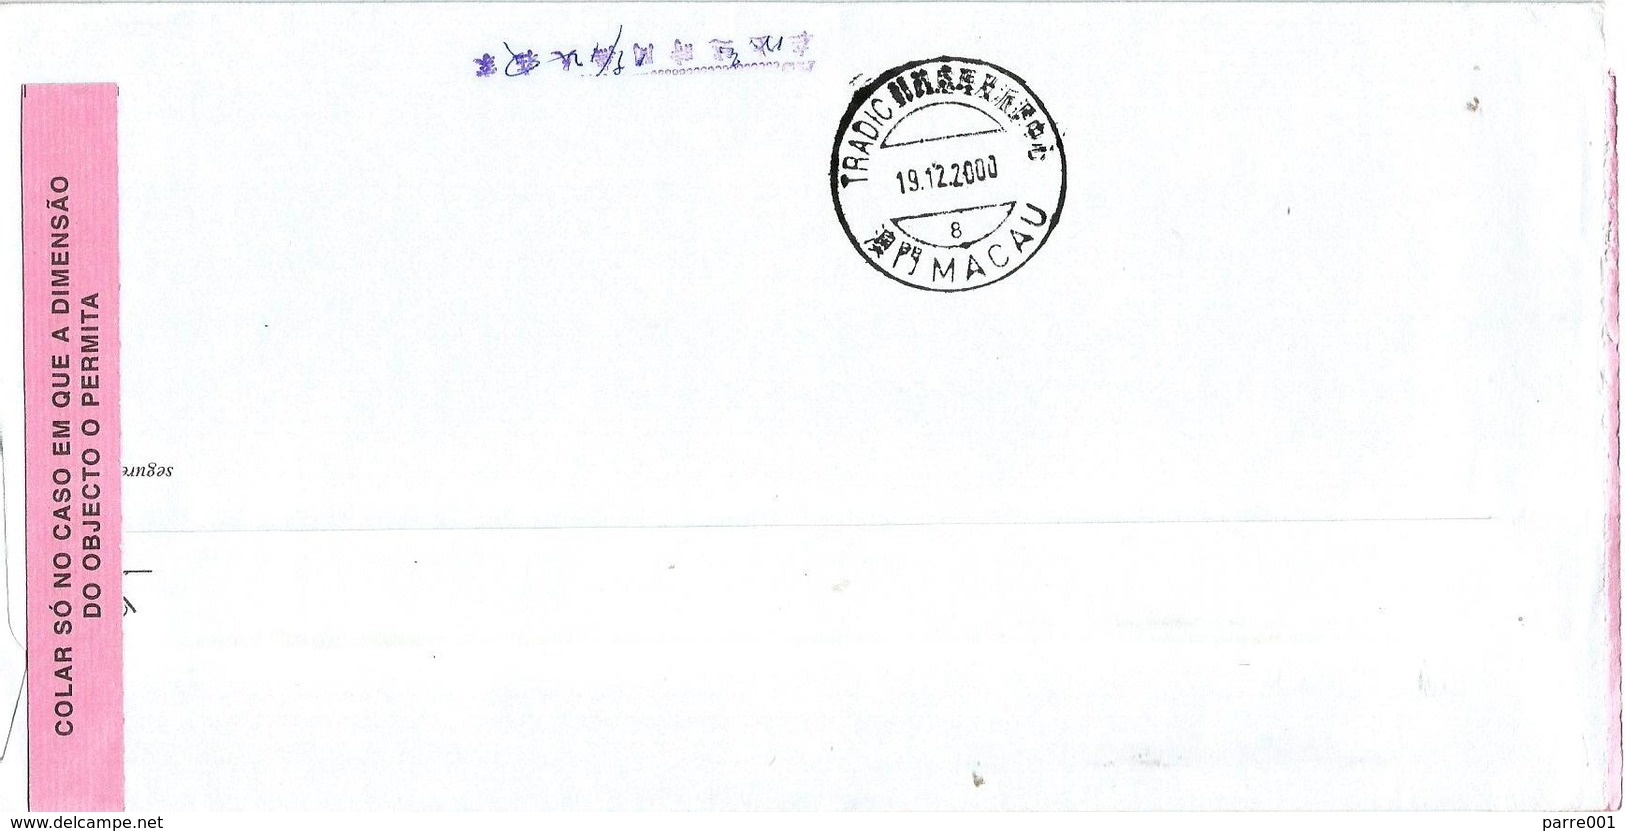 Macau 2000 Lisbon Meter Franking Postage Paid Unfranked Registered AR Cover - Covers & Documents